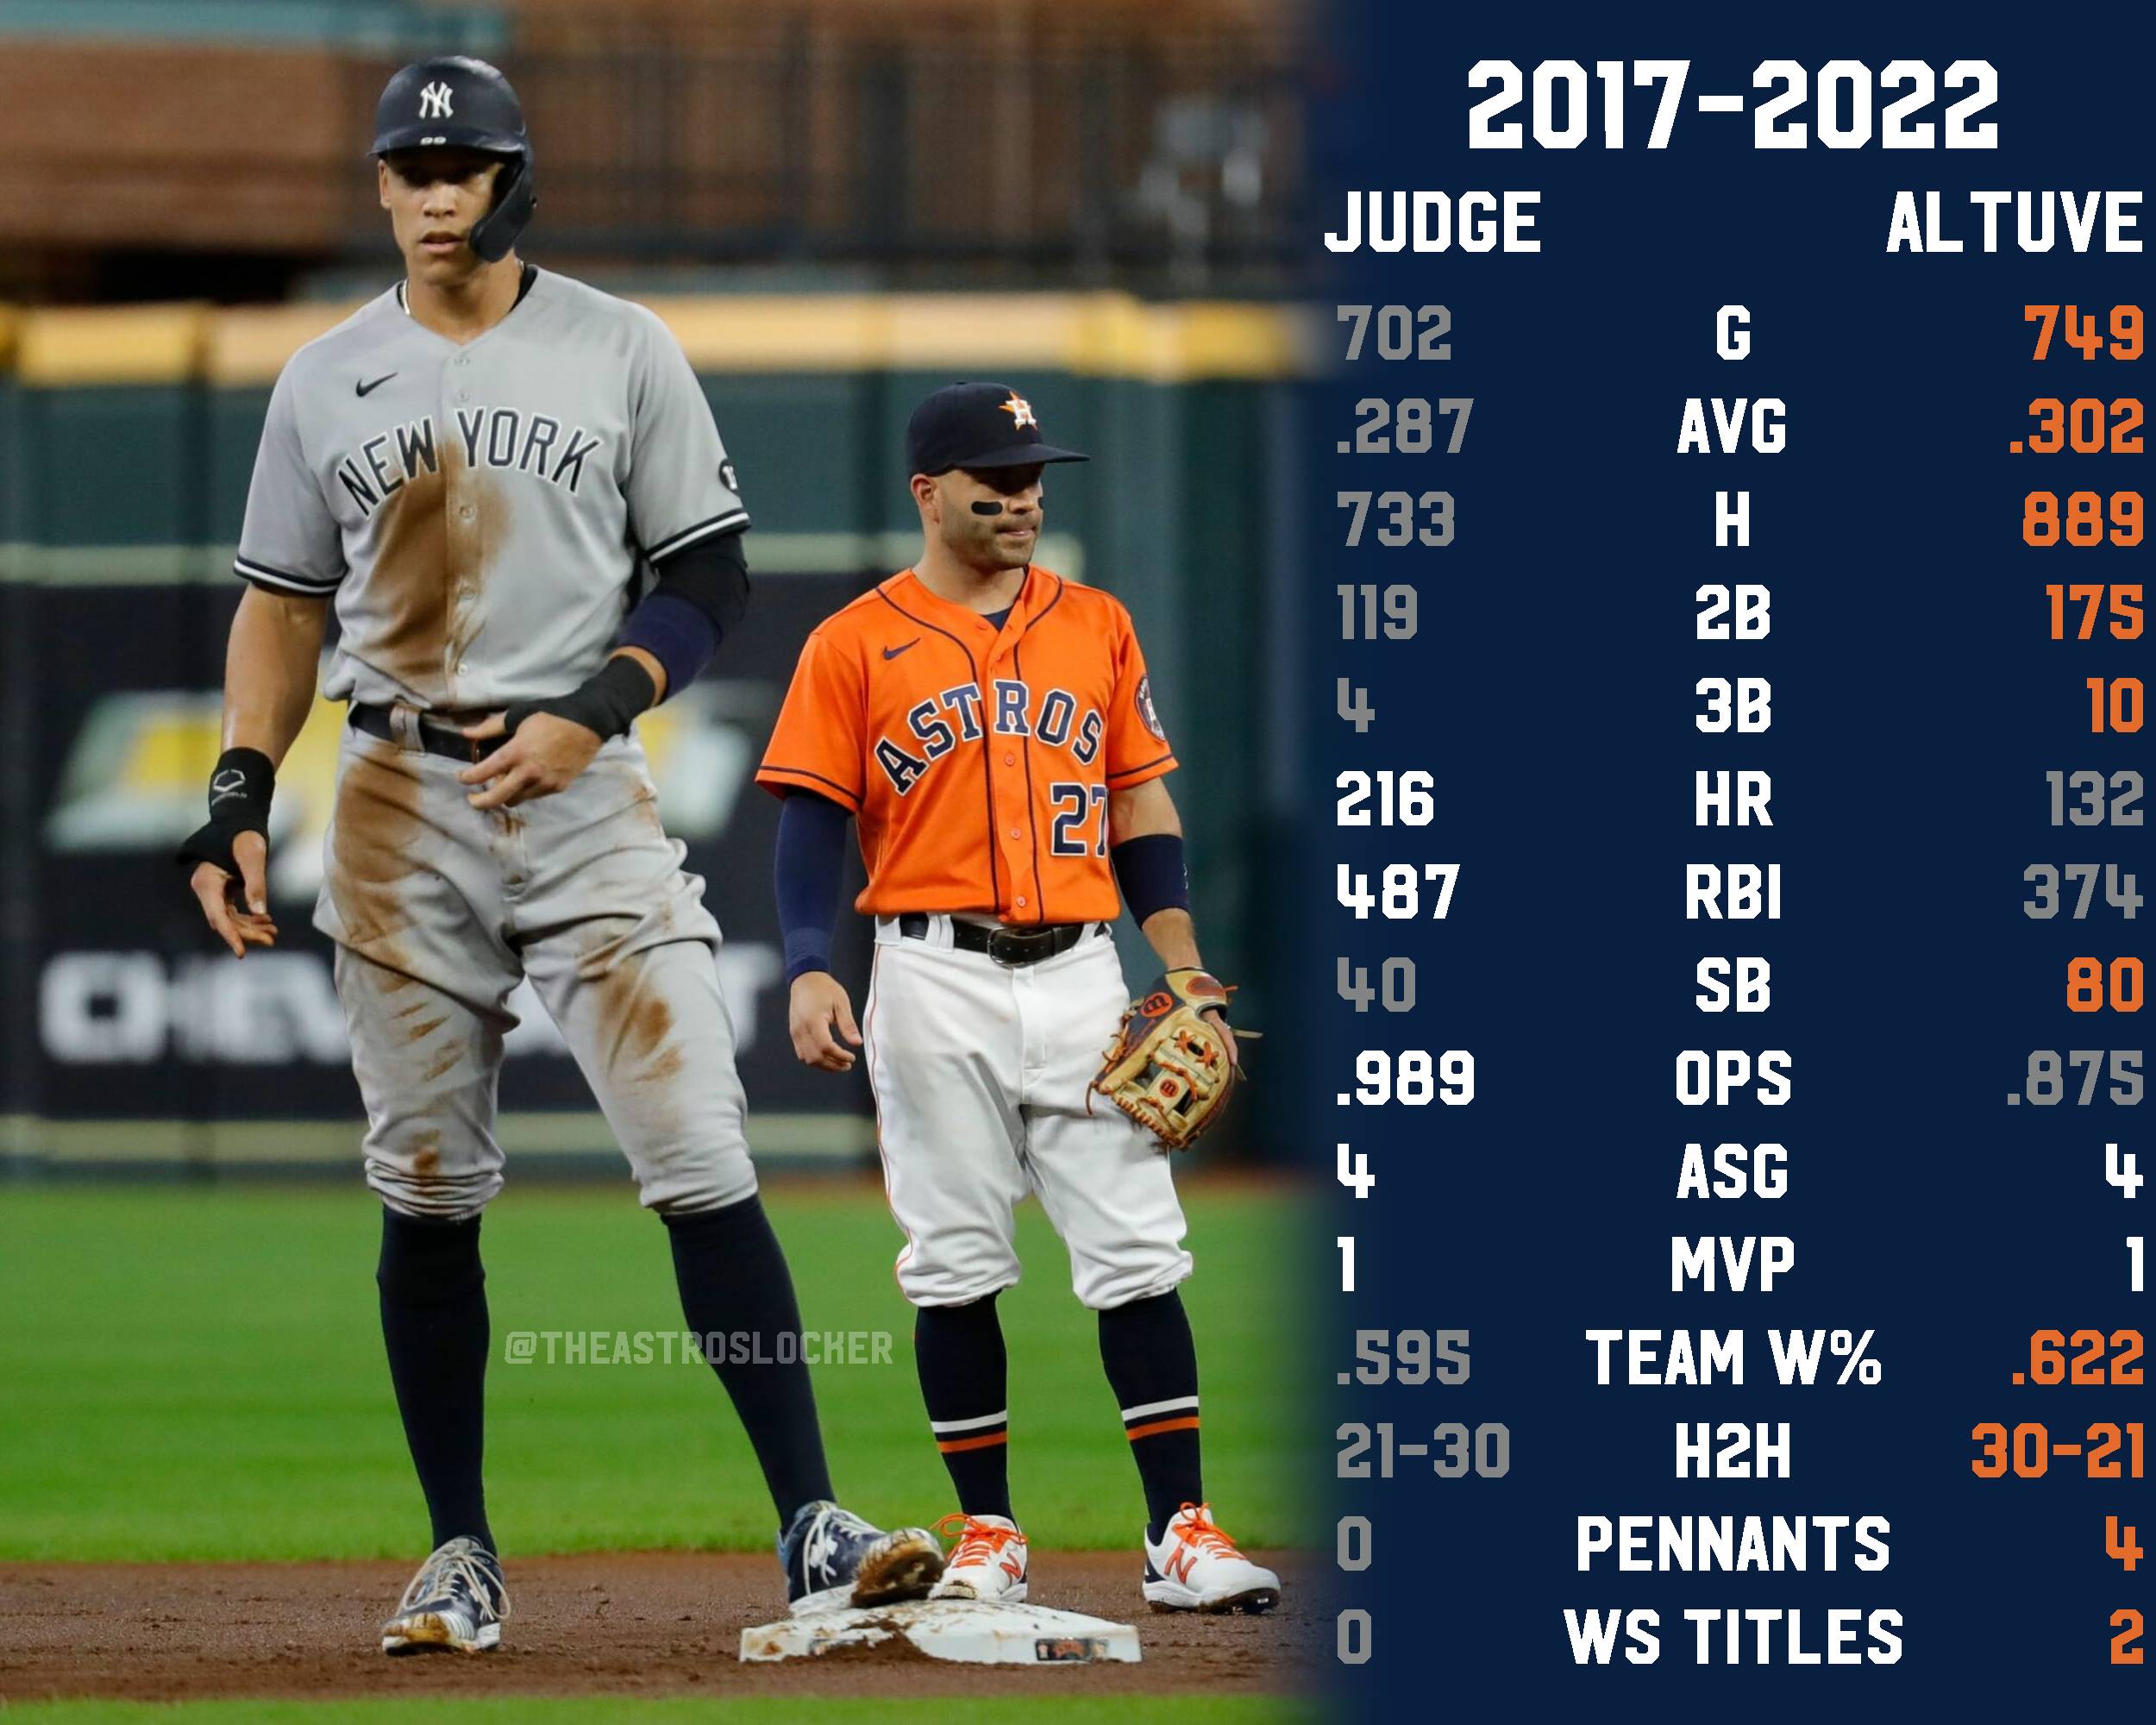 Aaron Judge and Jose Altuve, Hot or Cold, Set the Pace in the